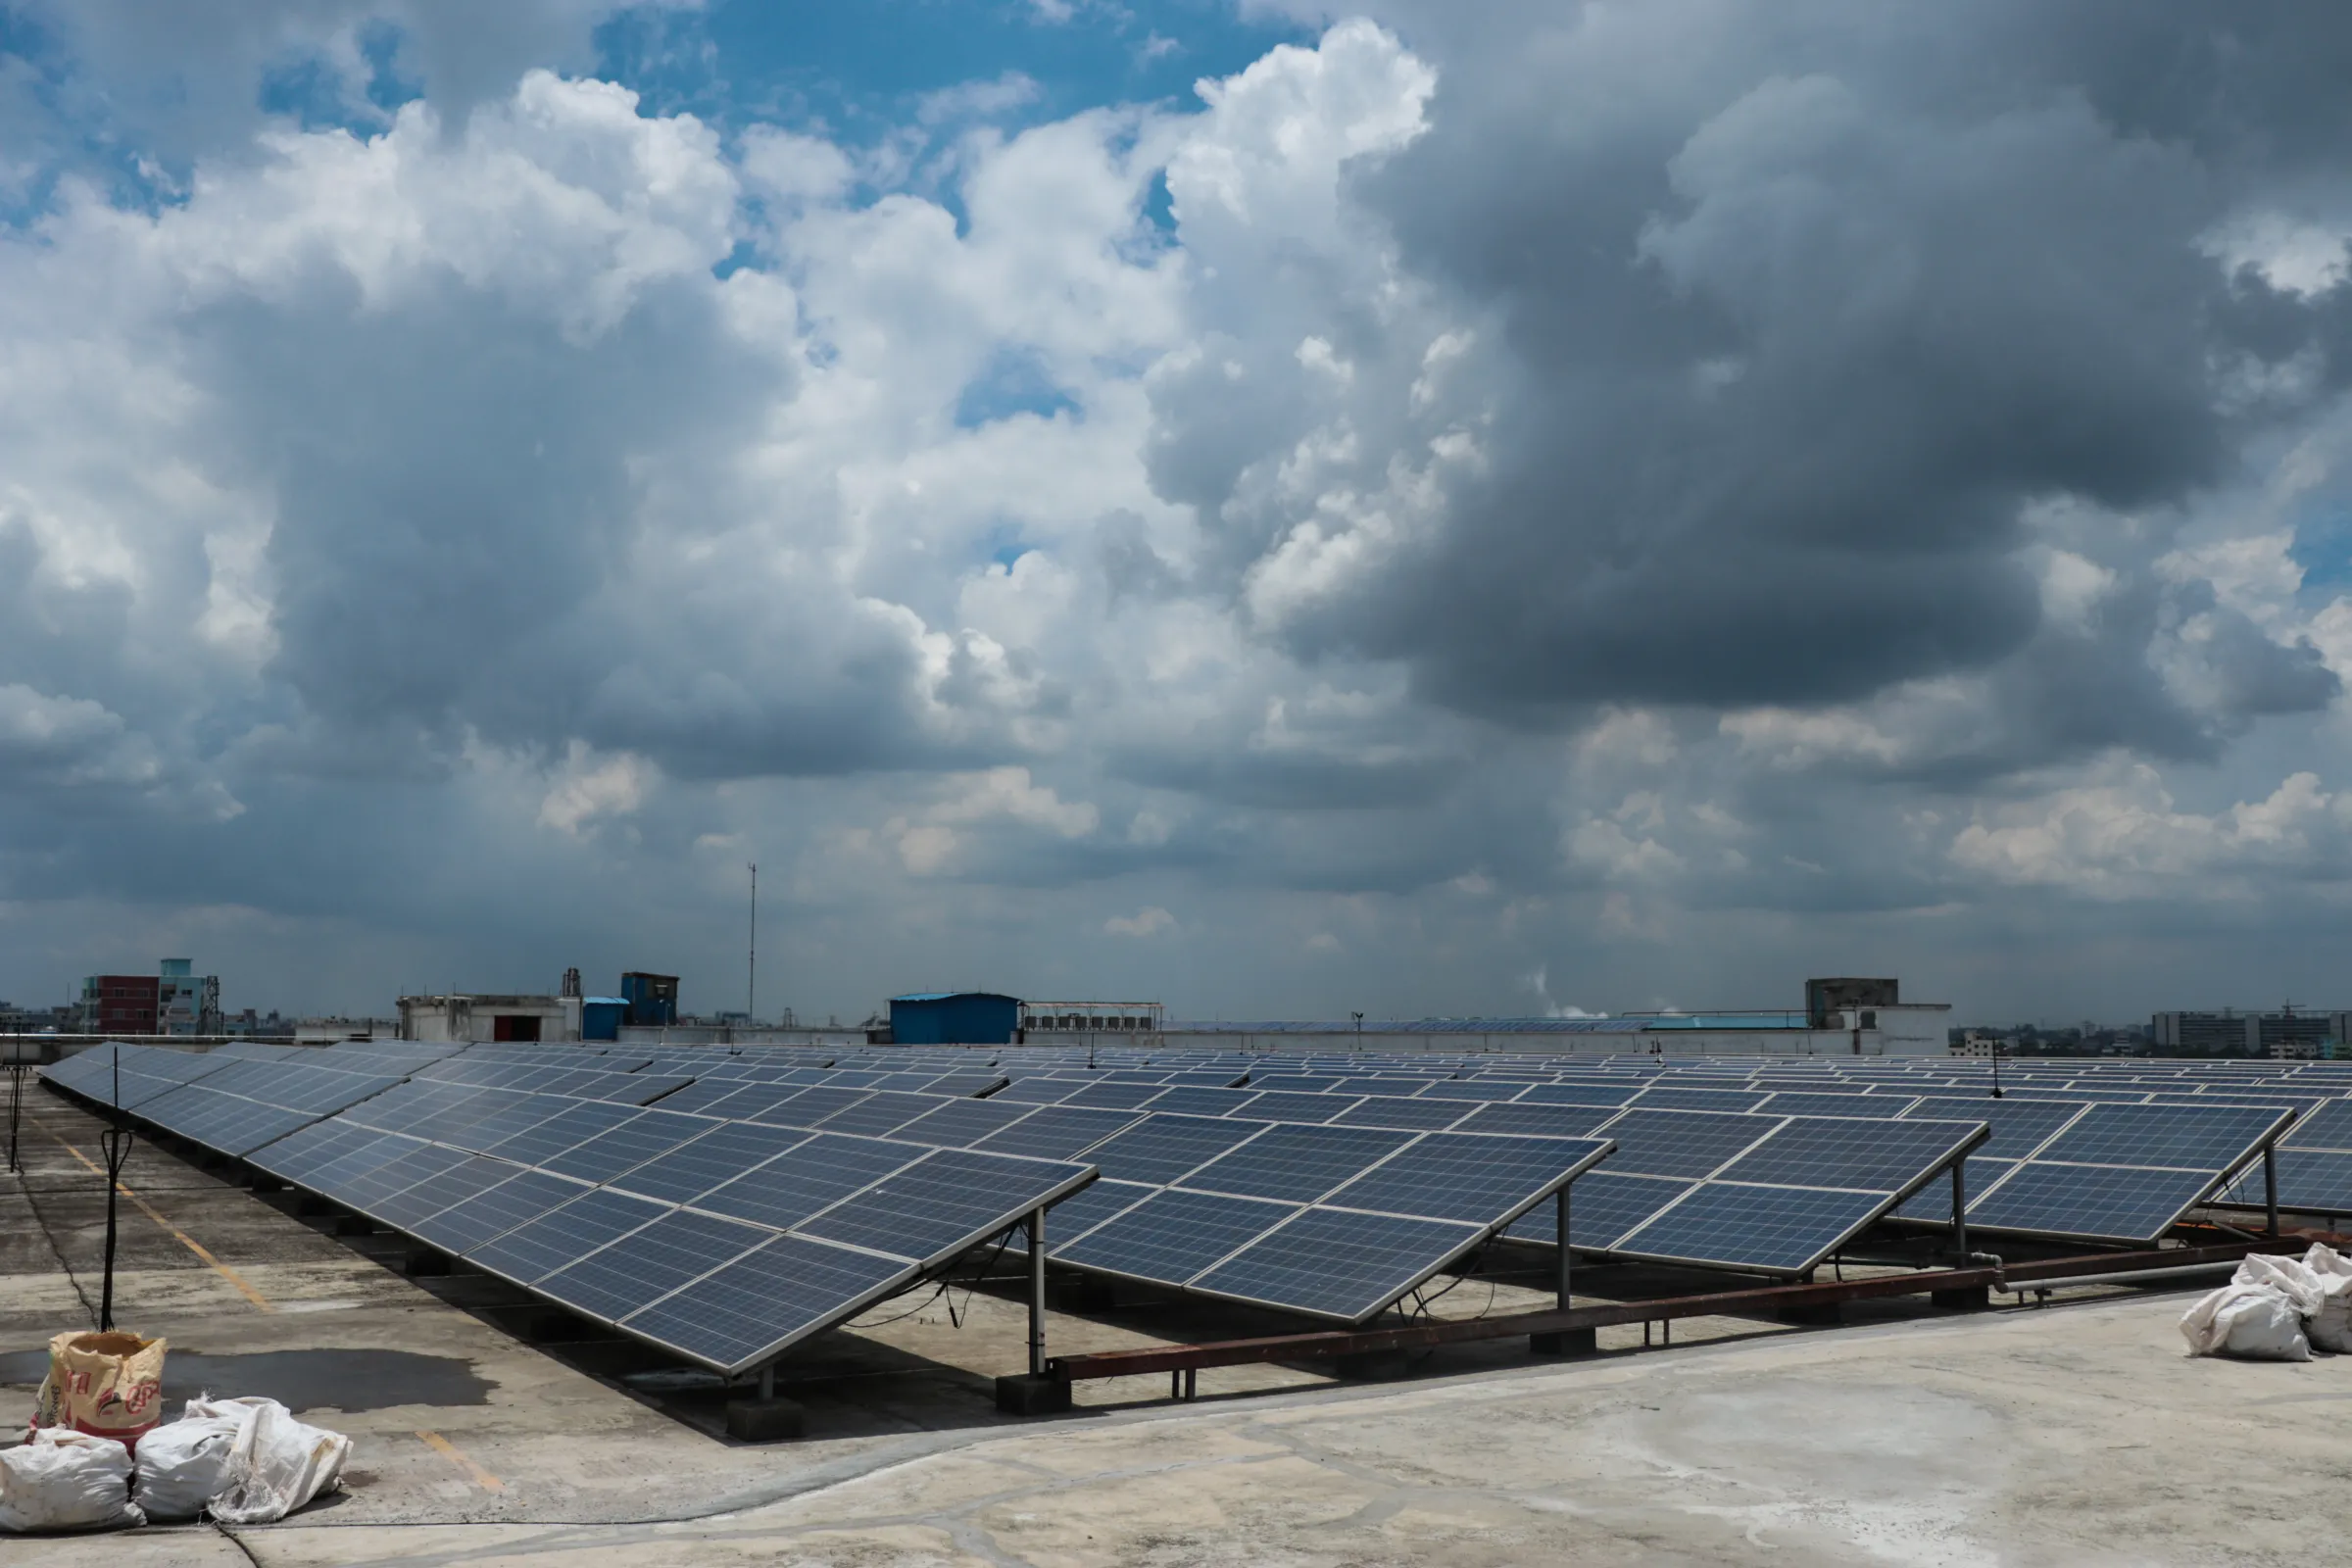 Solar panels situated on the rooftop of a Bangladeshi textile factory